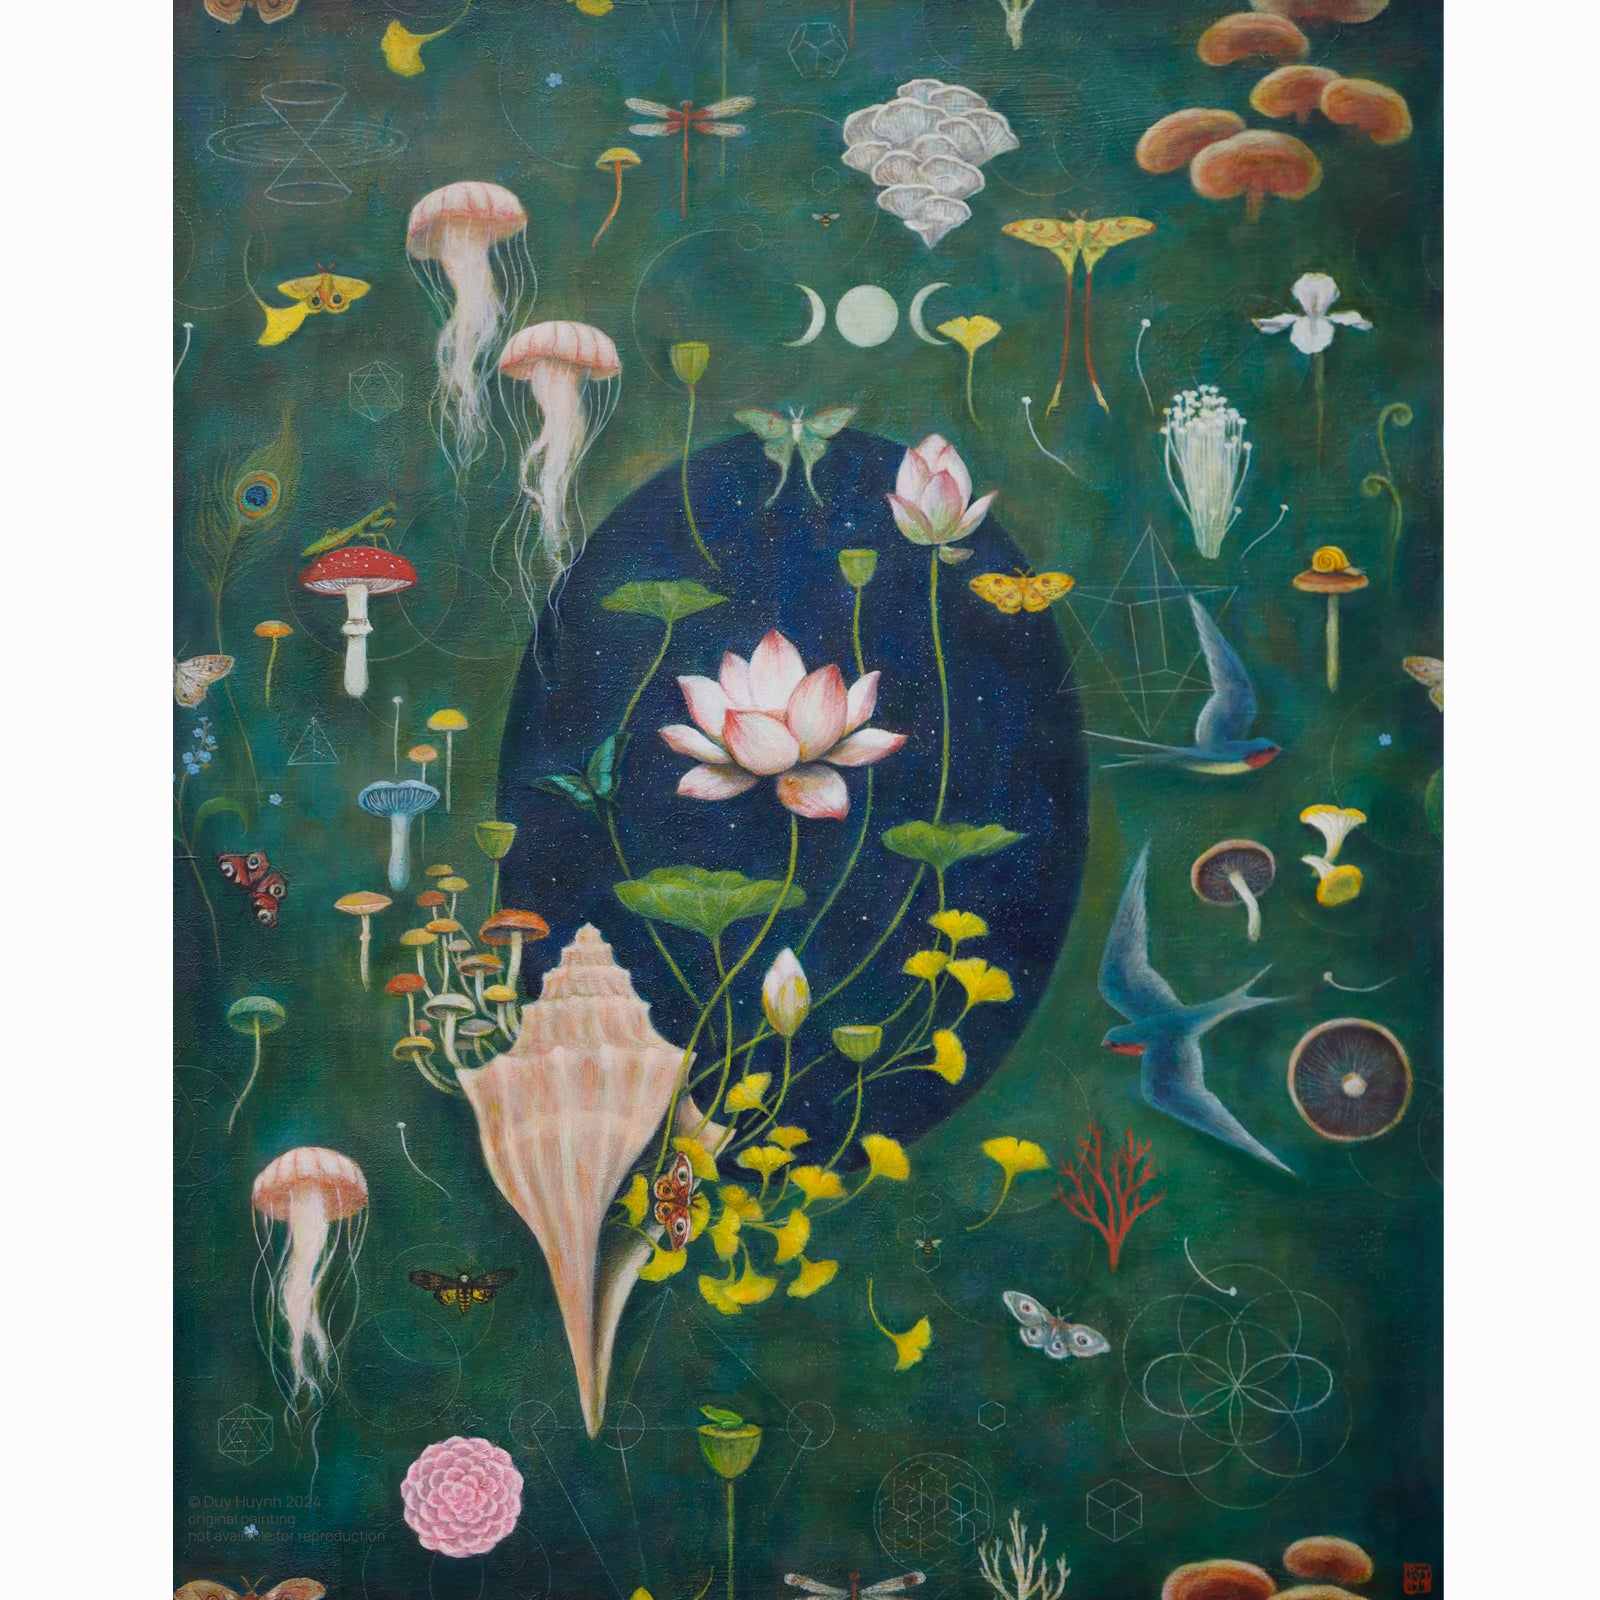 Artist Duy Huynh 's painting called "Forever Endeavor". Painting filled with elements that symbolize life and longevity - such as mushrooms, lotus flowers, jellyfish, gingko leaves, swallows, moths, etc. Available at Lark & Key, Charlotte NC.